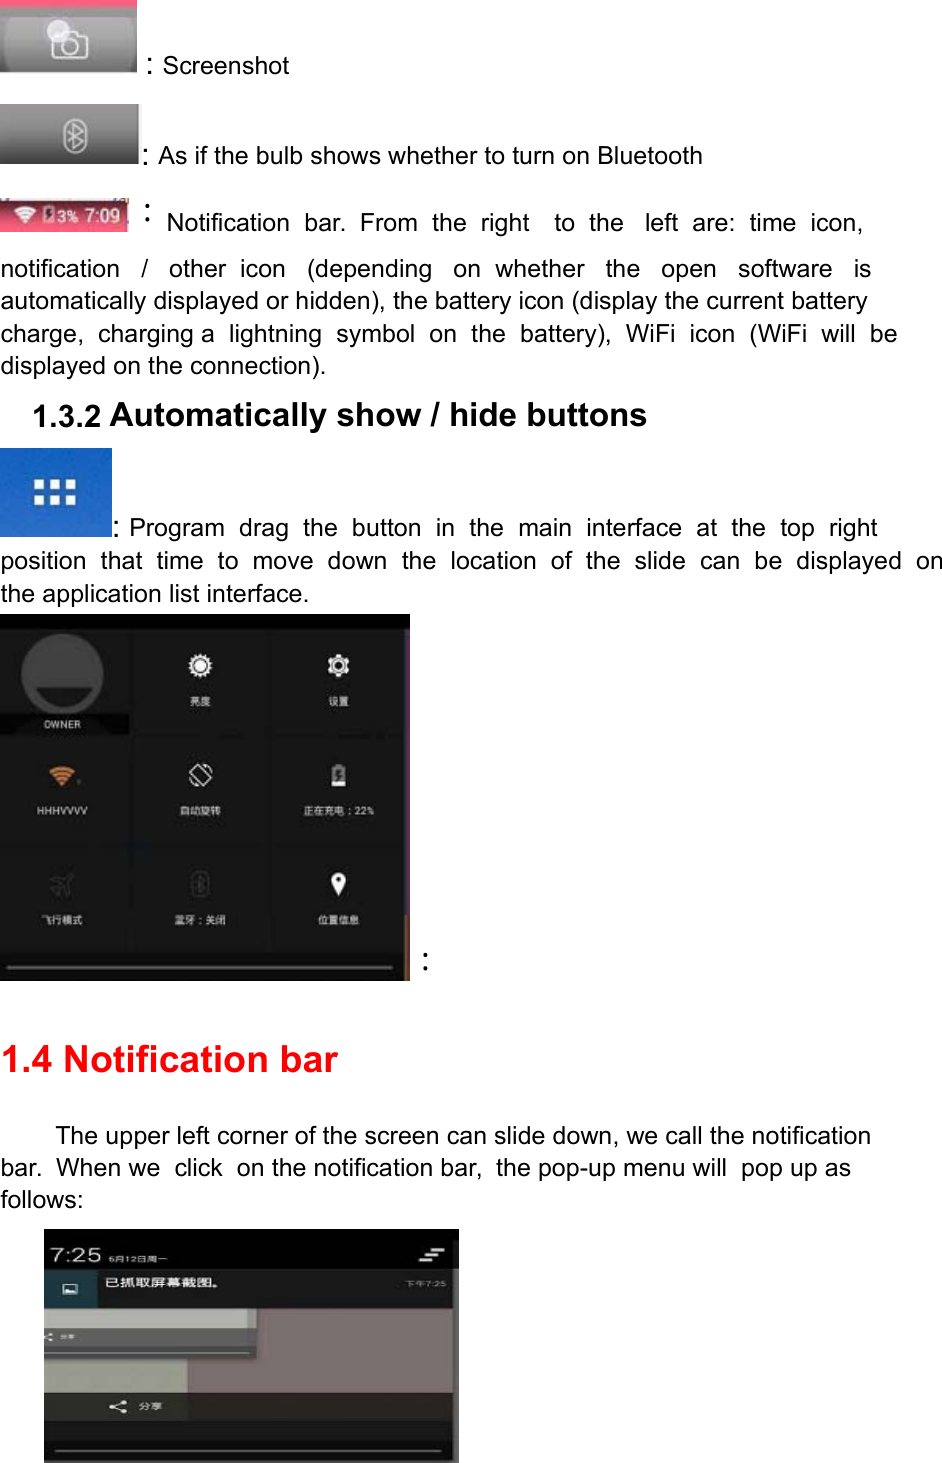  : Screenshot : As if the bulb shows whether to turn on Bluetooth ：Notification  bar.  From  the  right to  the   left  are:  time  icon,  notification   /   other  icon   (depending   on  whether   the   open   software   is  automatically displayed or hidden), the battery icon (display the current battery charge,  charging a  lightning  symbol  on  the  battery),  WiFi  icon  (WiFi  will  be displayed on the connection). 1.3.2 Automatically show / hide buttons : Program  drag  the  button  in  the  main  interface  at  the  top  right position  that  time  to  move  down  the  location  of  the  slide  can  be  displayed  on the application list interface. ：  1.4 Notification bar The upper left corner of the screen can slide down, we call the notification bar.  When we  click  on the notification bar,  the pop-up menu will  pop up as follows:  